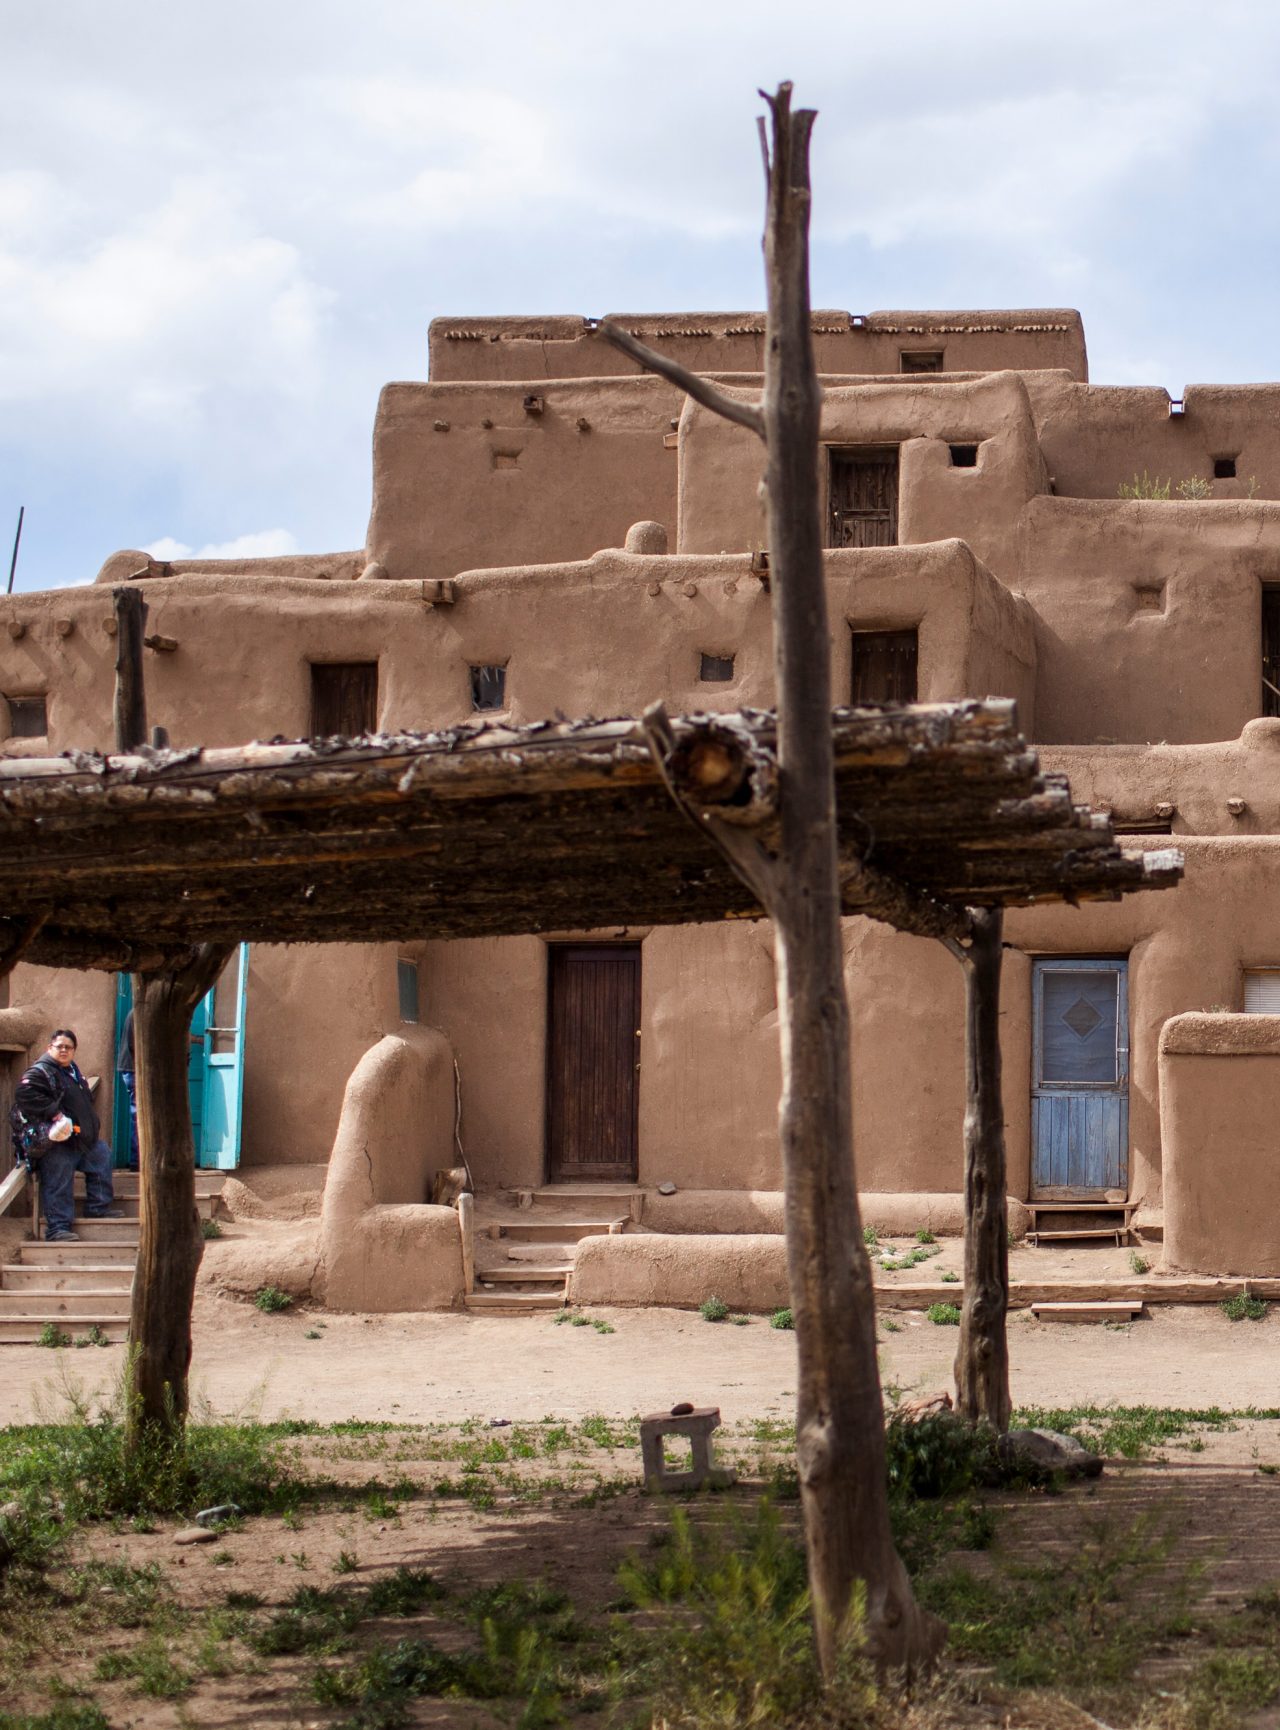 Taos Pueblo is perhaps the oldest continuously inhabited community in the United States and still carries on many of its original traditions.